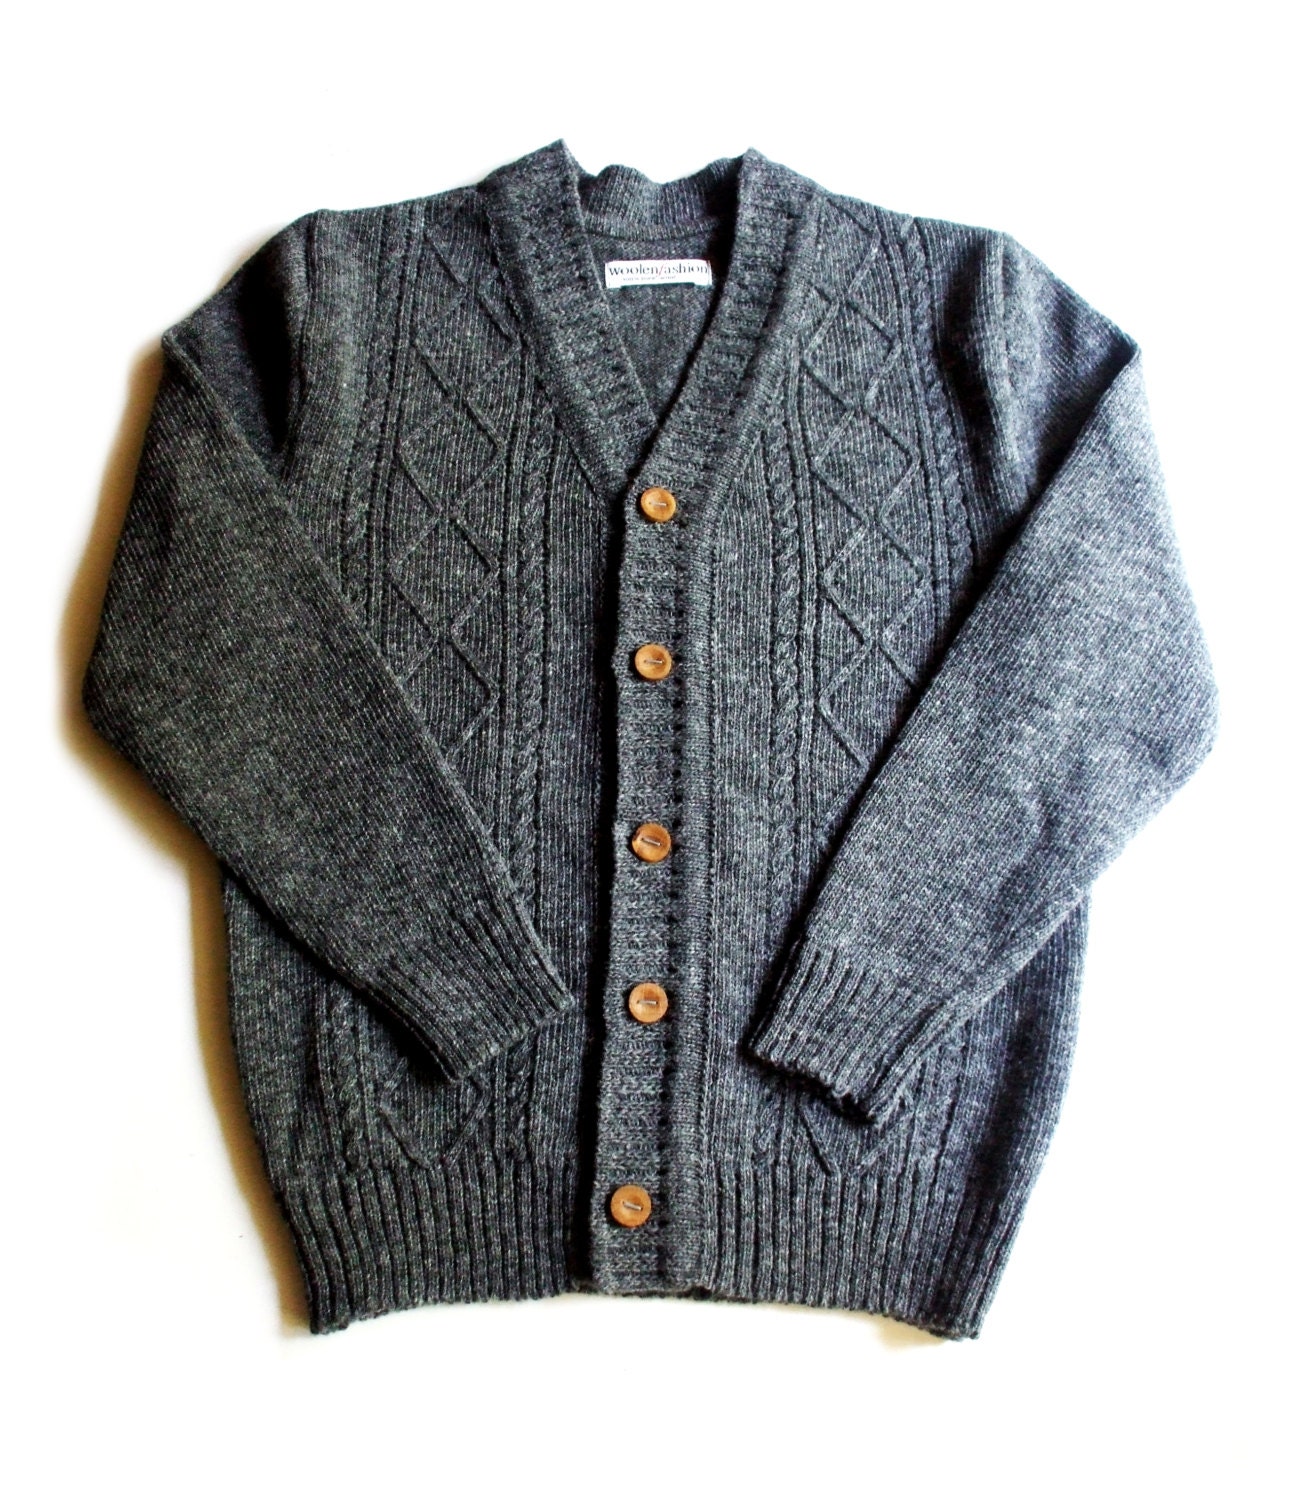 Men's knitted lambswool V-neck cardigan with handmade oak